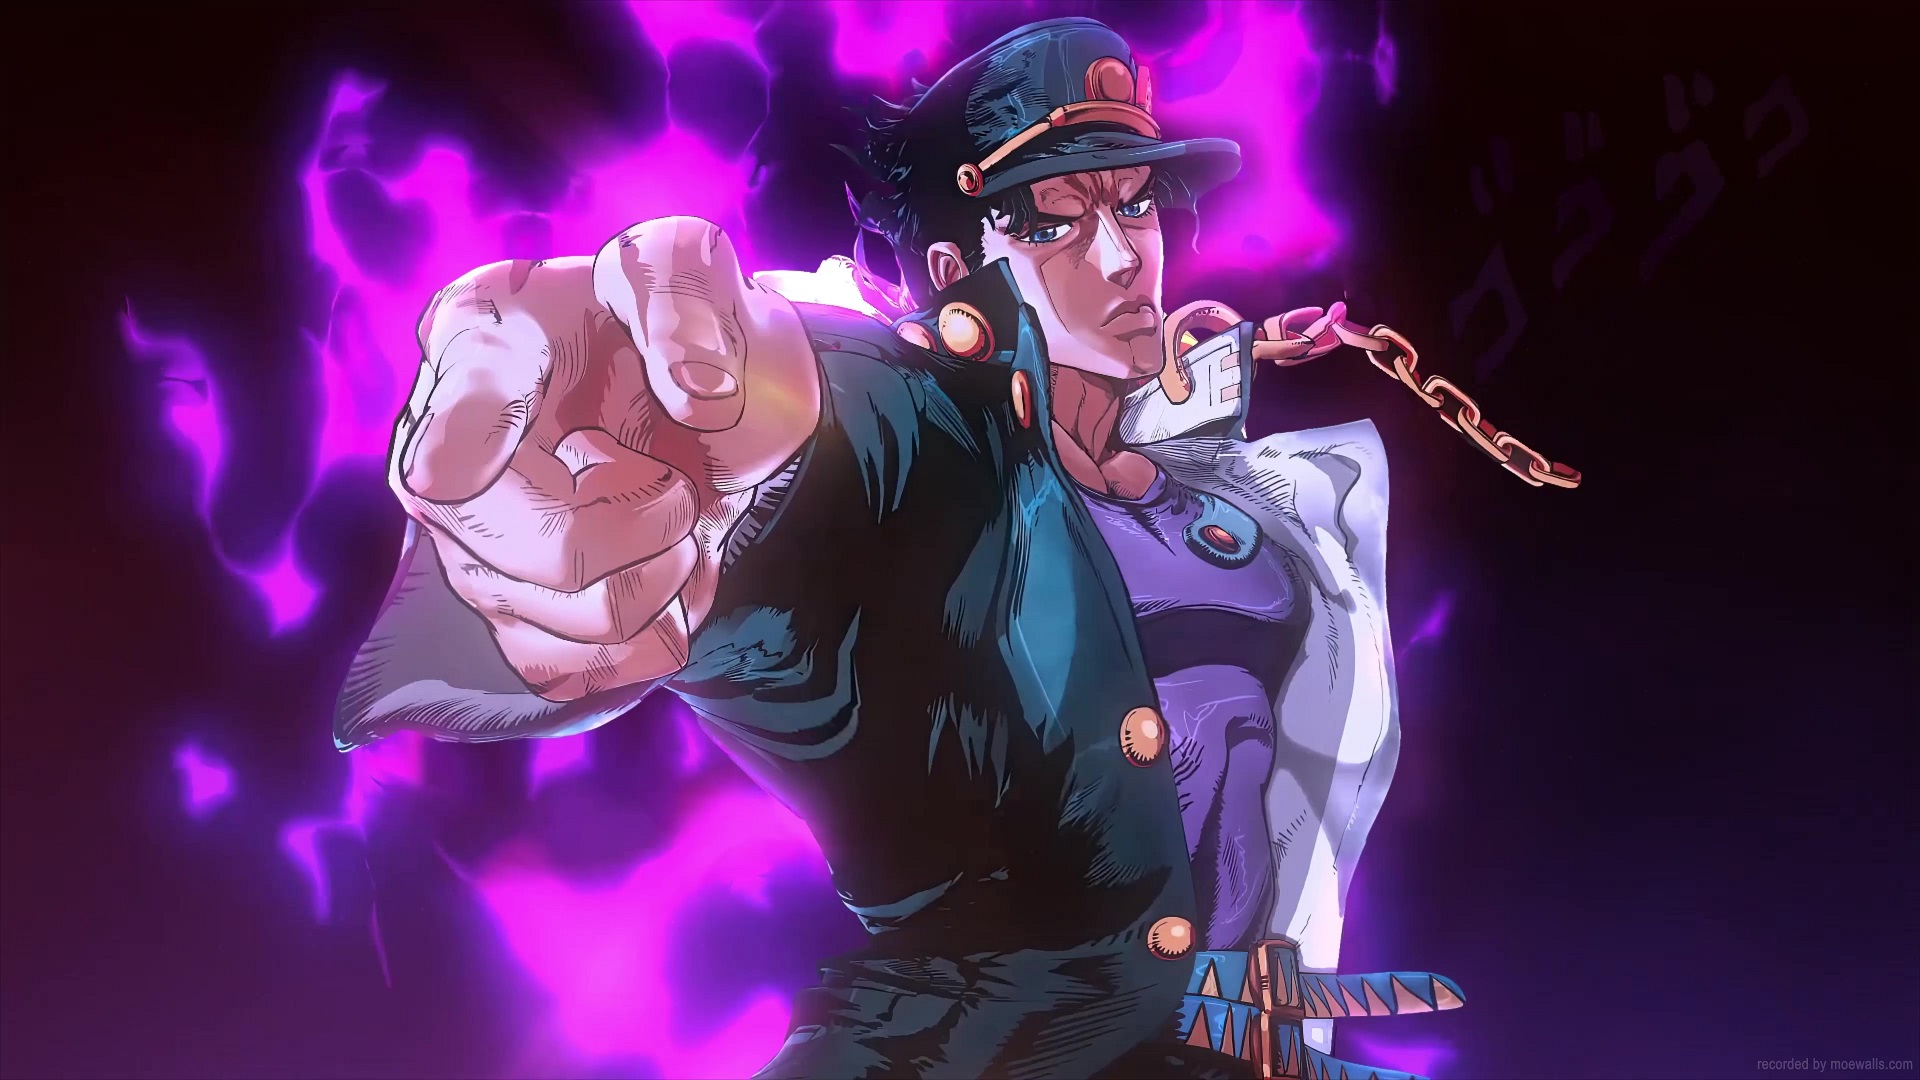 Res 1920x1080 Jotaro And Star Platinum Wallpaper By S - vrogue.co